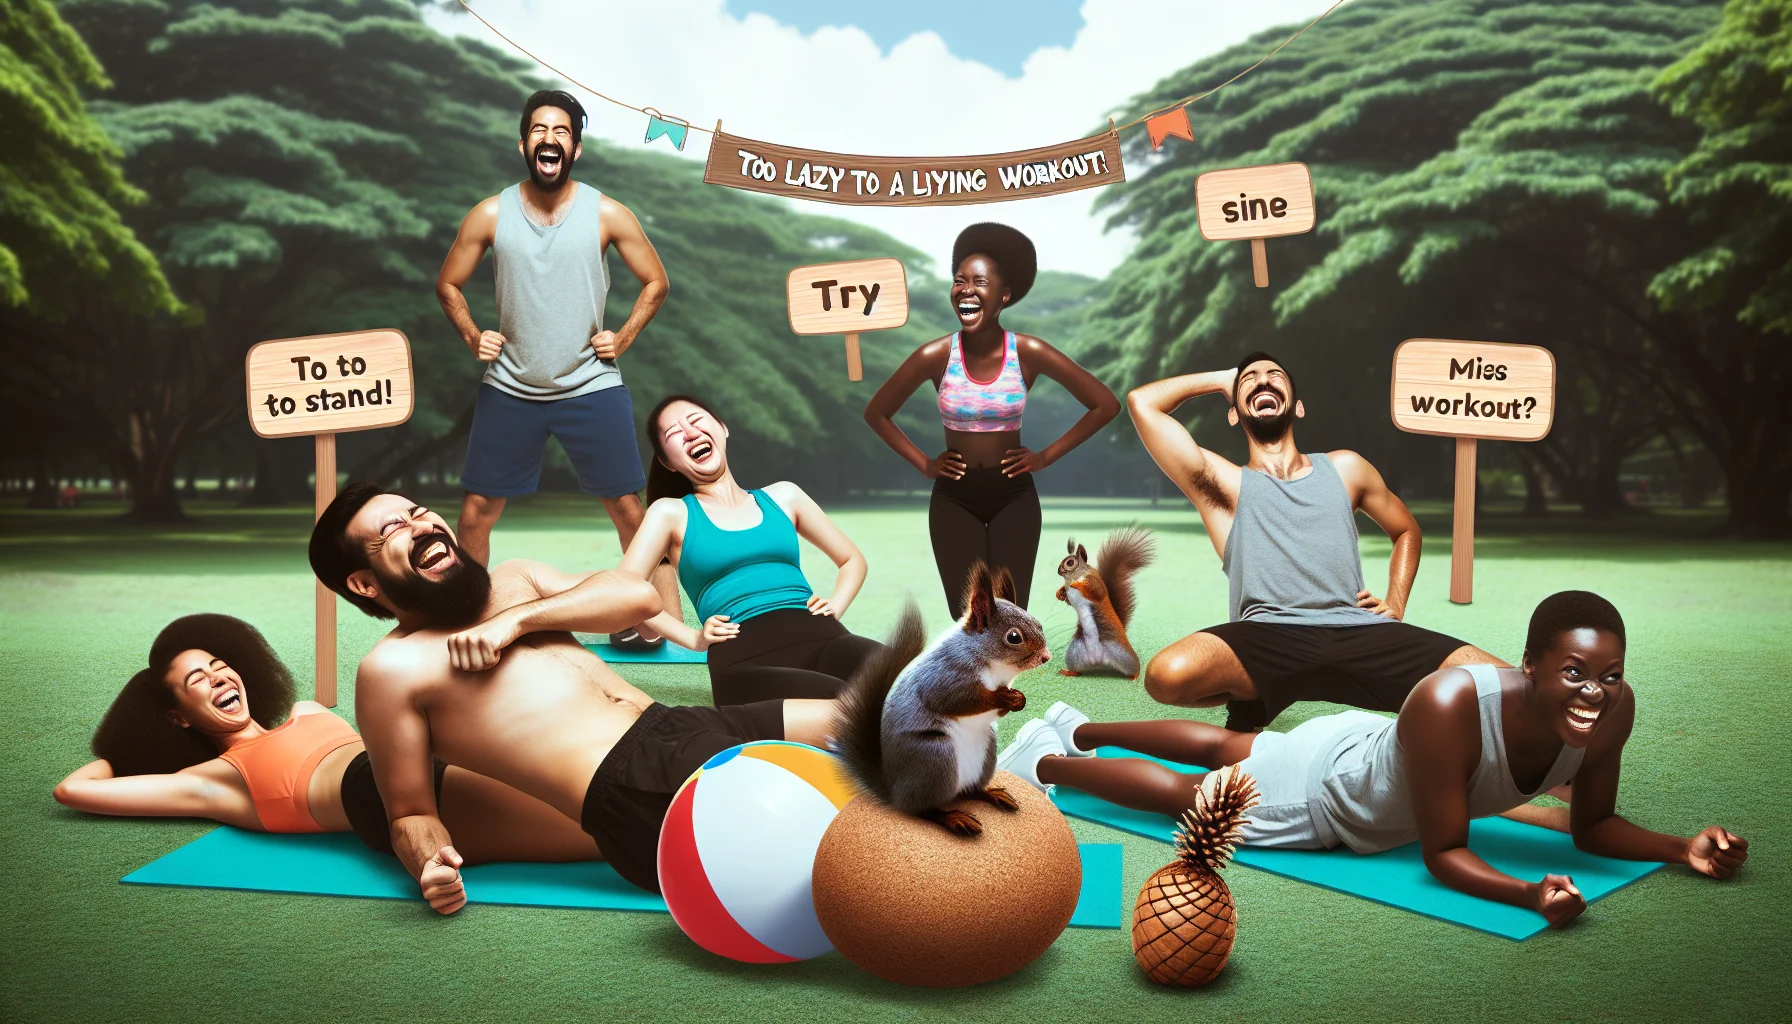 Create a humorous and motivational scene of a diverse group of people engaged in a tabata workout sequence while lying down. Set in an open outdoor park, with lush greenery. In the scene, there is a South Asian man, grinning widely as his pet squirrel attempts to mimic the exercise. Near him, a Black woman is laughing heartily while trying not to miss her count. To their side, a Middle-Eastern man uses a large beach ball instead of a weight, dramatically losing his balance resulting in friendly laughter. Cute banners flutter around that read 'Too lazy to stand? Try Tabata lying workout!'